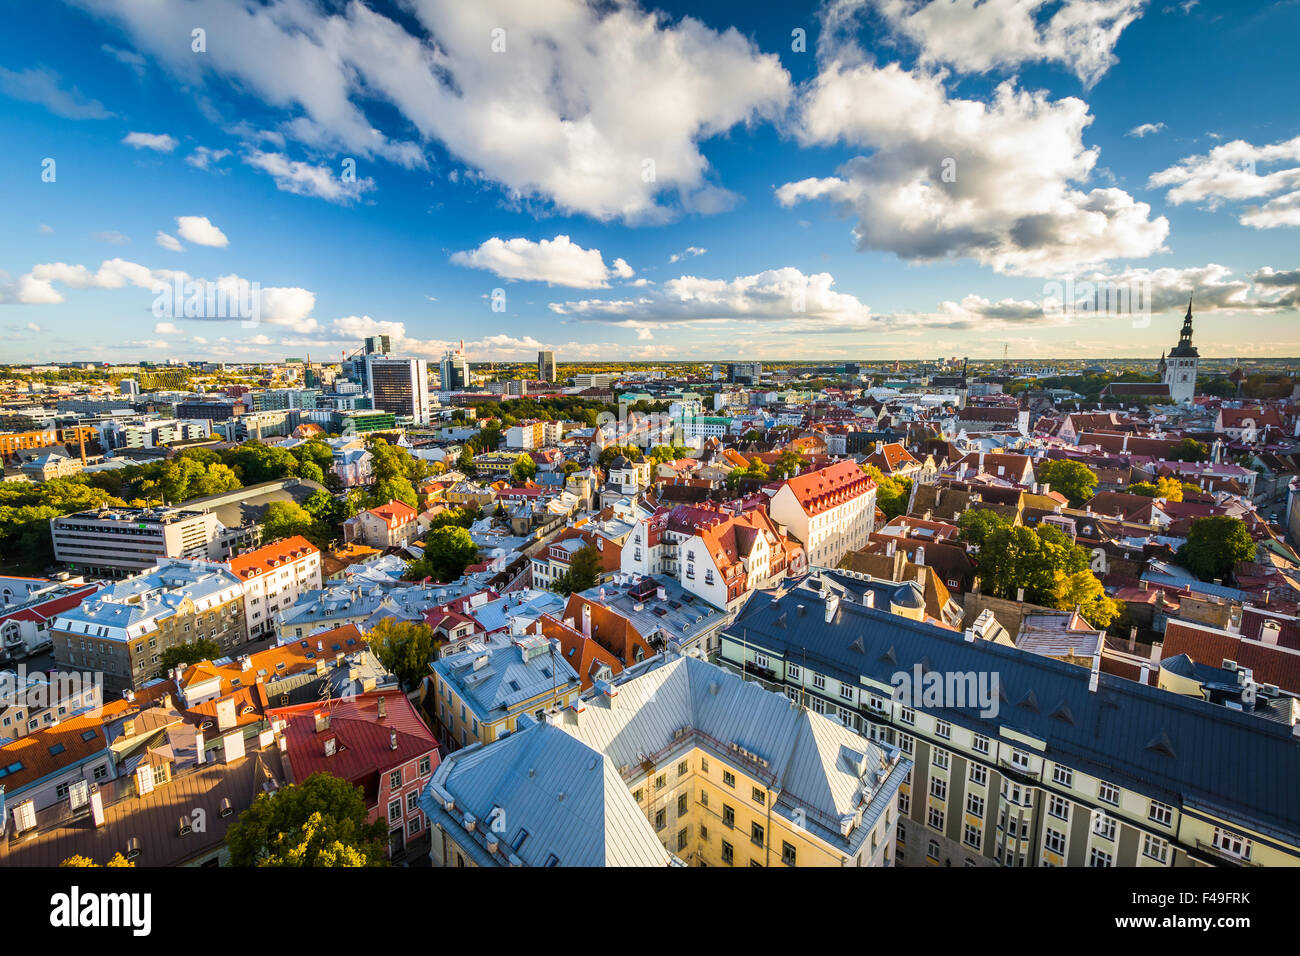 View of the Old Town from St. Olaf's Church Tower, in Tallinn, Estonia. Stock Photo